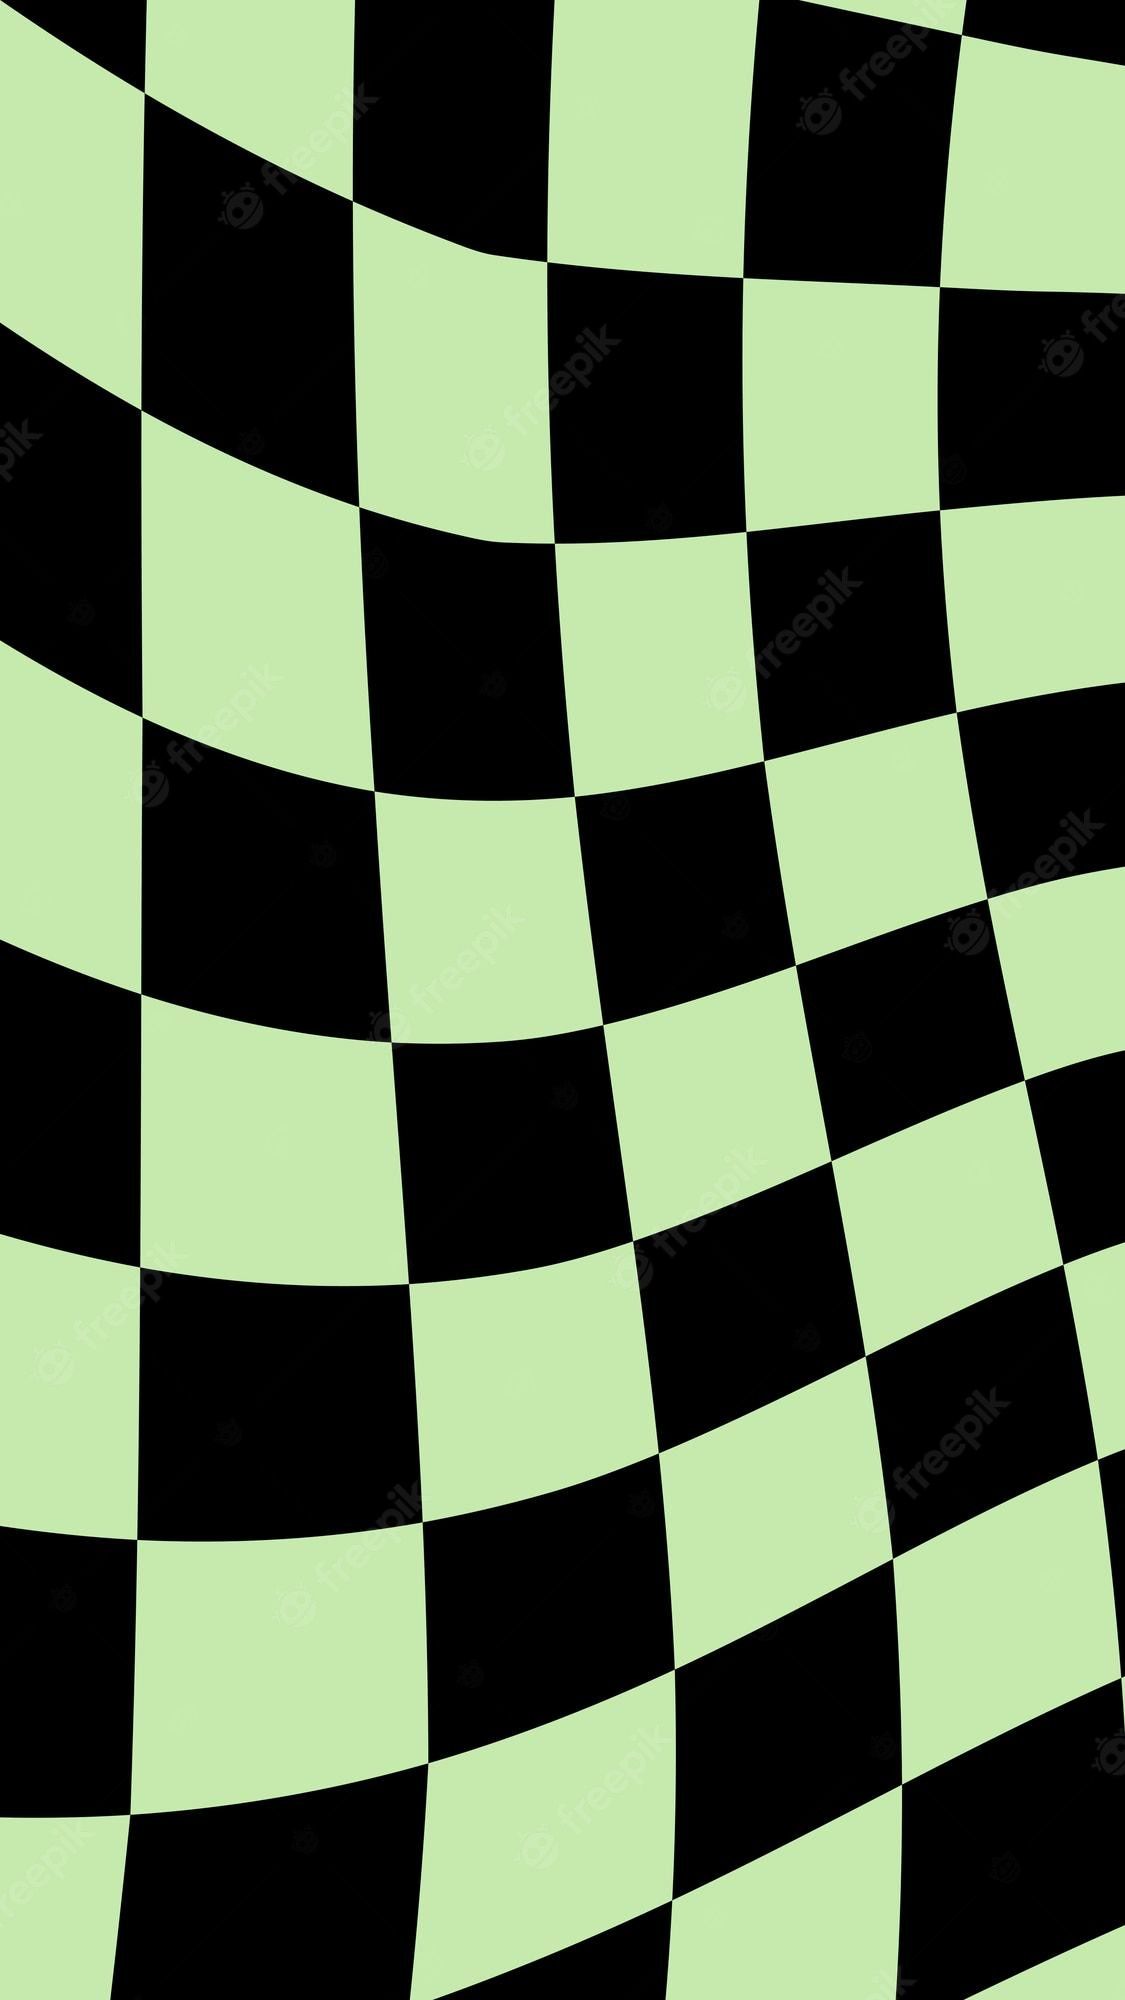 A green and black checkered pattern - Punk